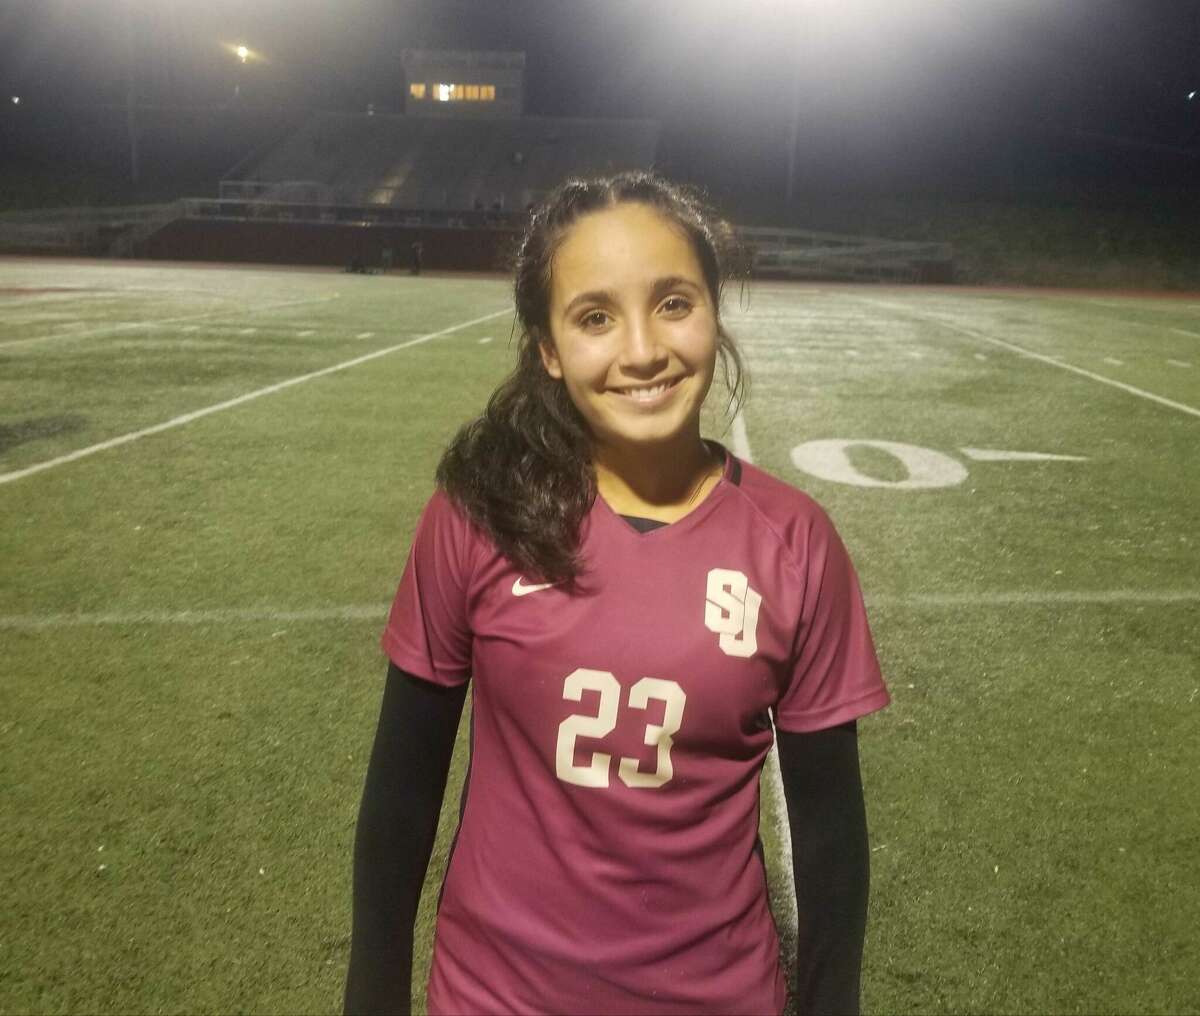 Alexa Pino scored six goals in St. Joseph's victory over Holy Cross in the 2022 Class L state tournament second round.